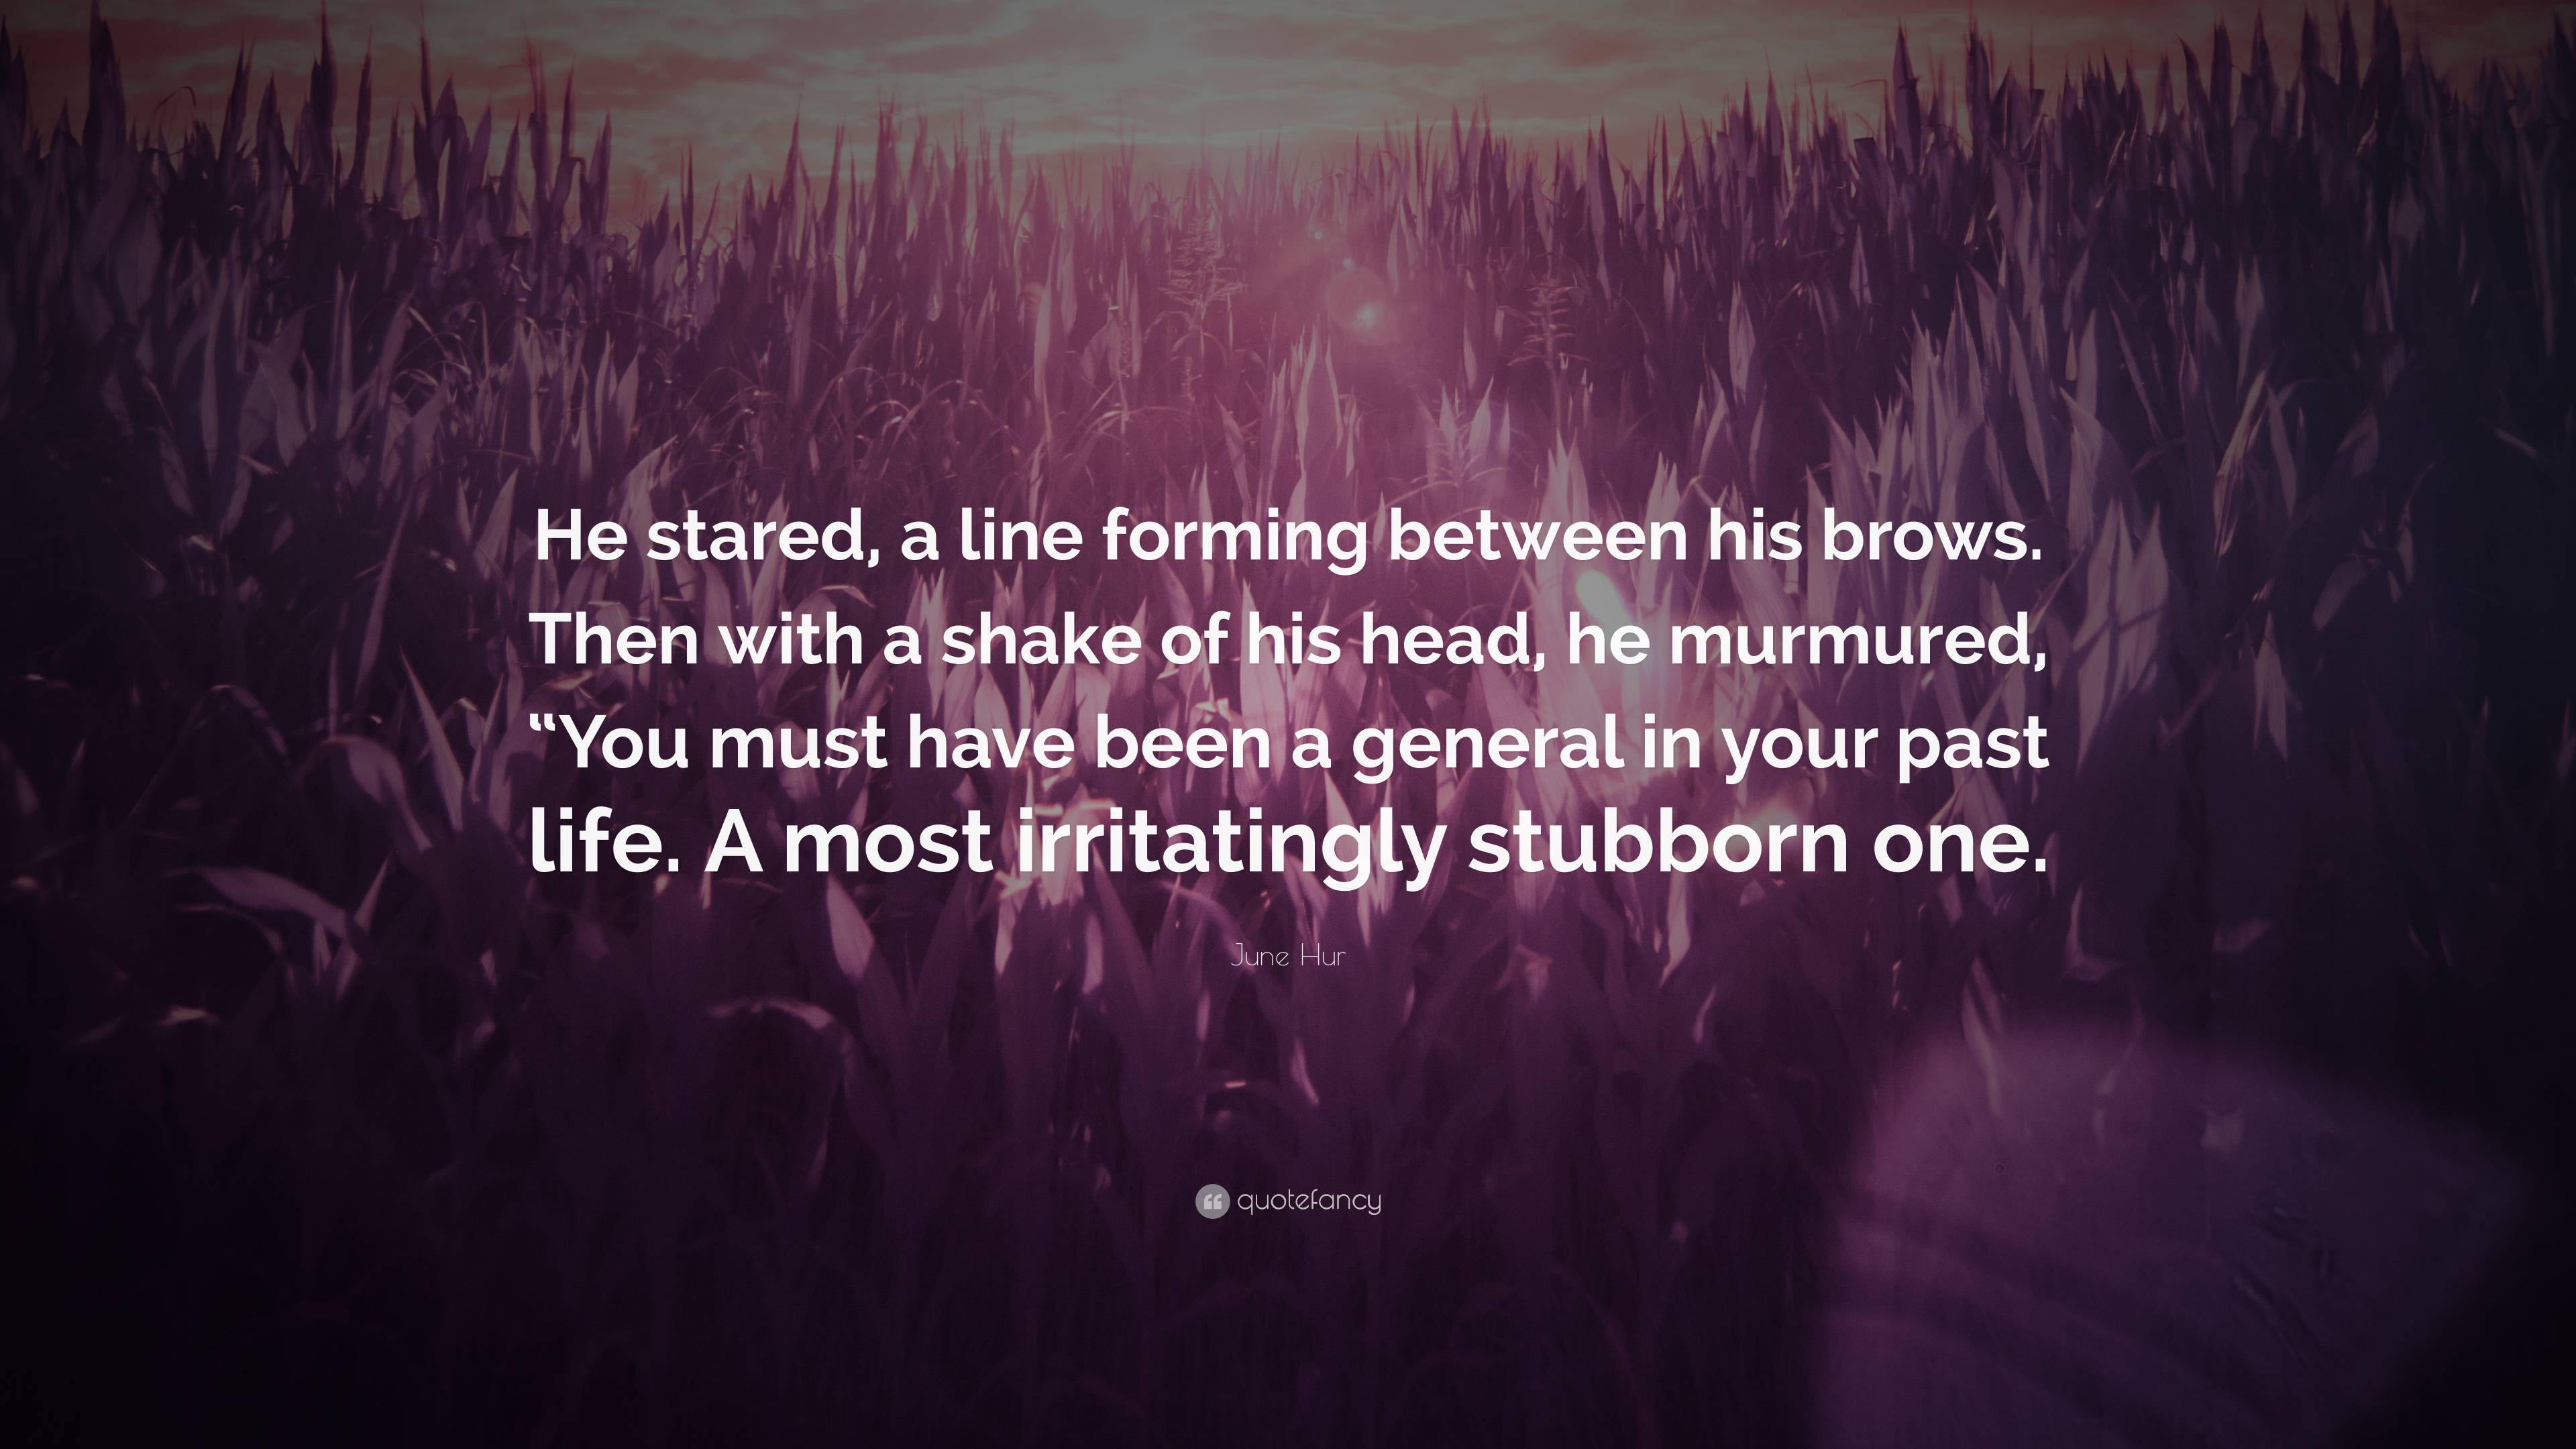 June Hur Quote: “He stared, a line forming between his brows. Then with ...